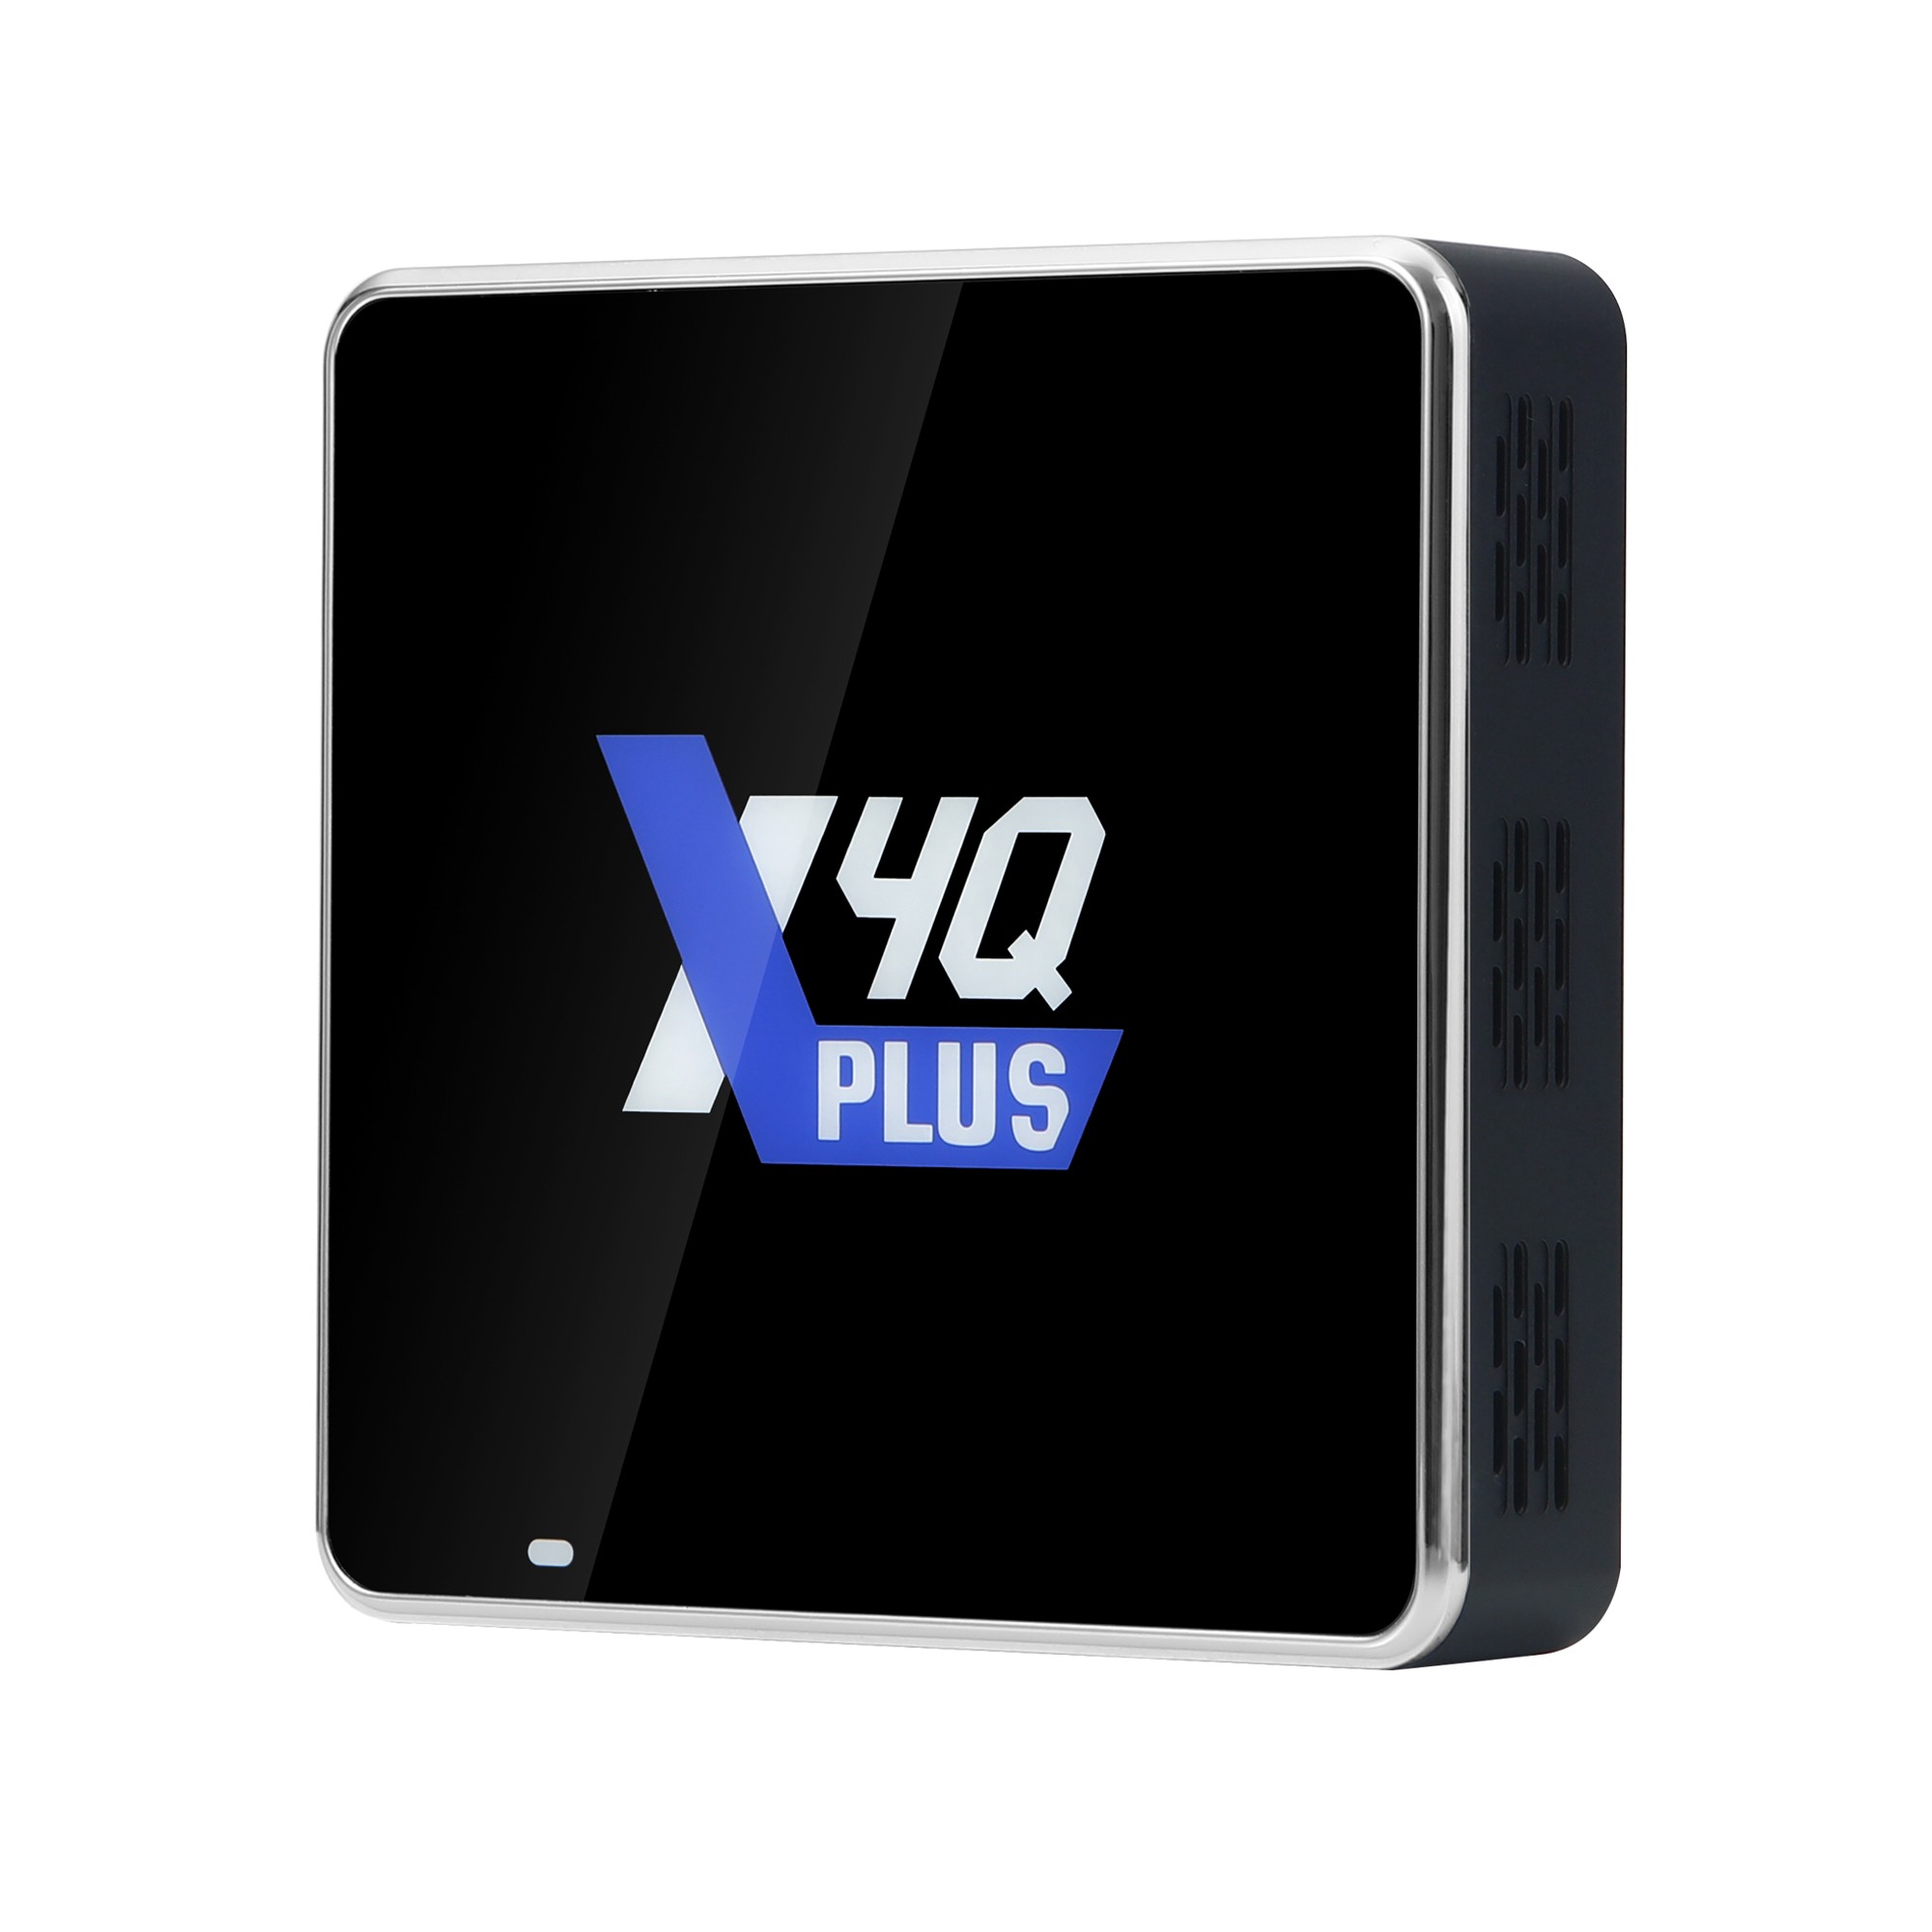 X4Q TV Box Family Series Devices based on Android 11